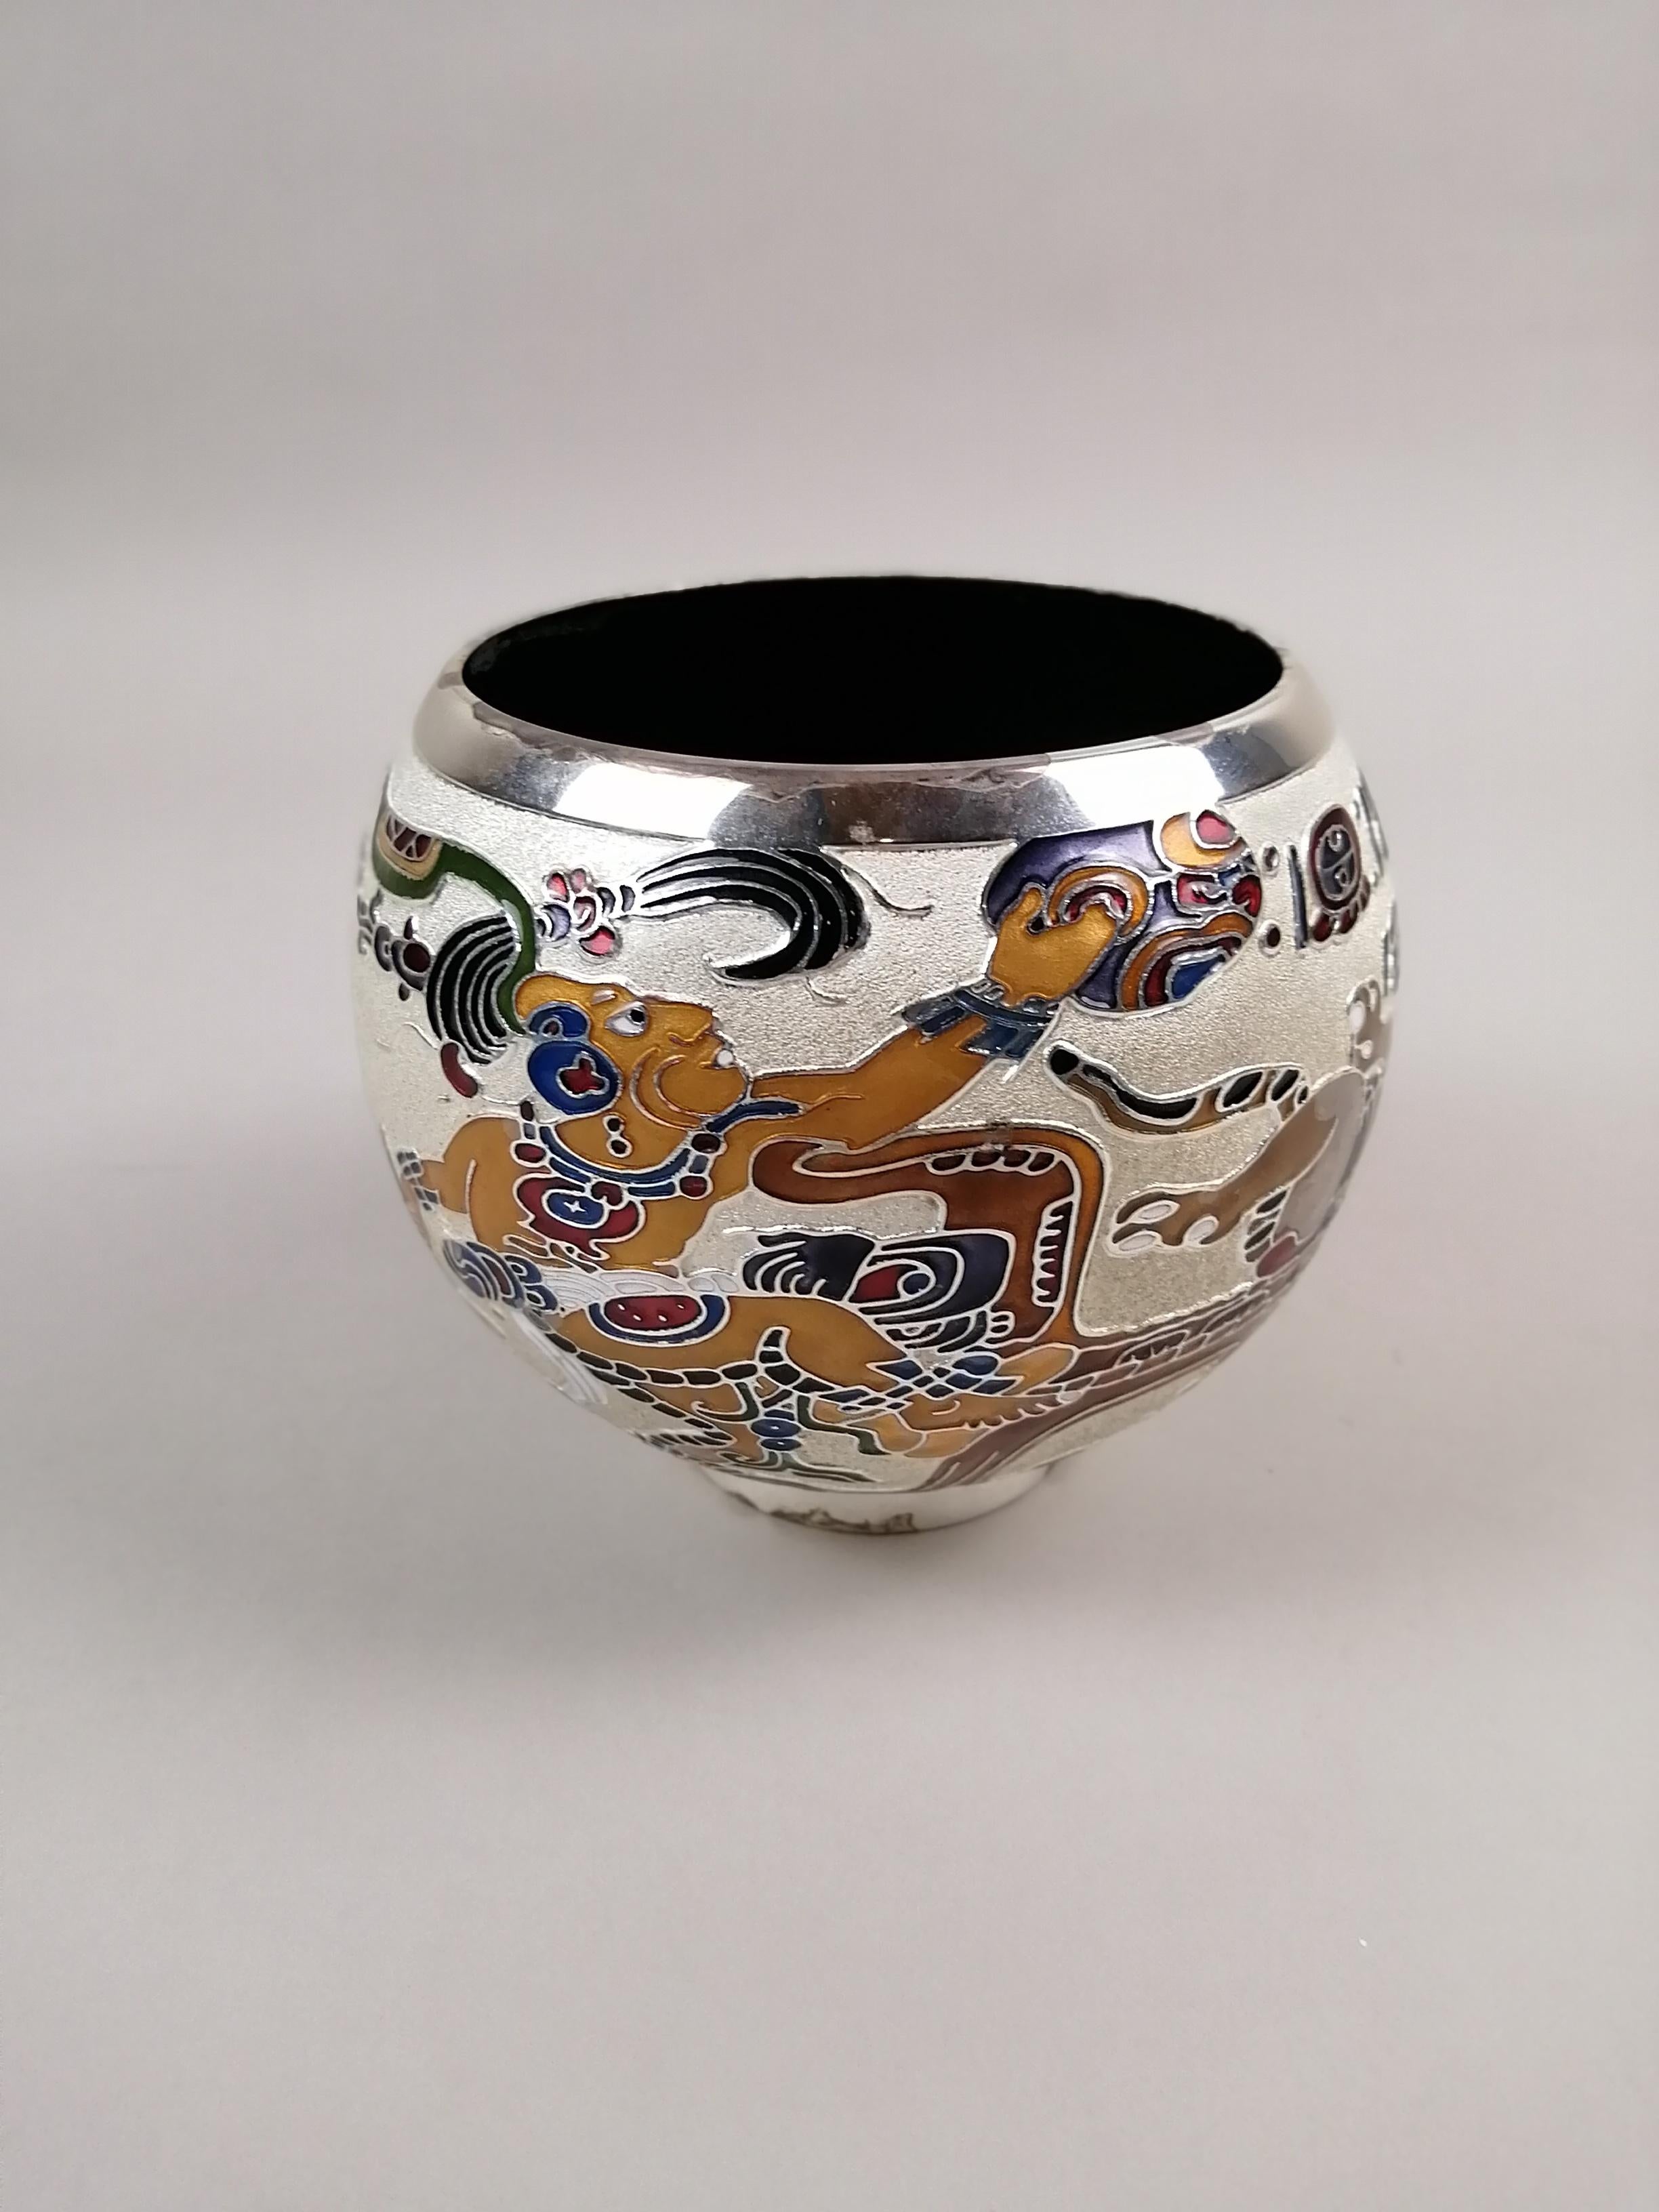 A fine Mexican silverplate and enamel bowl with Neo-Mayan decoration by Miguel Pineda. Made in Mexico City during the 1980s. The decoration is inspired by paintings found in Pre-Hispanic Mayan ceramics. Signed on the lower edge.